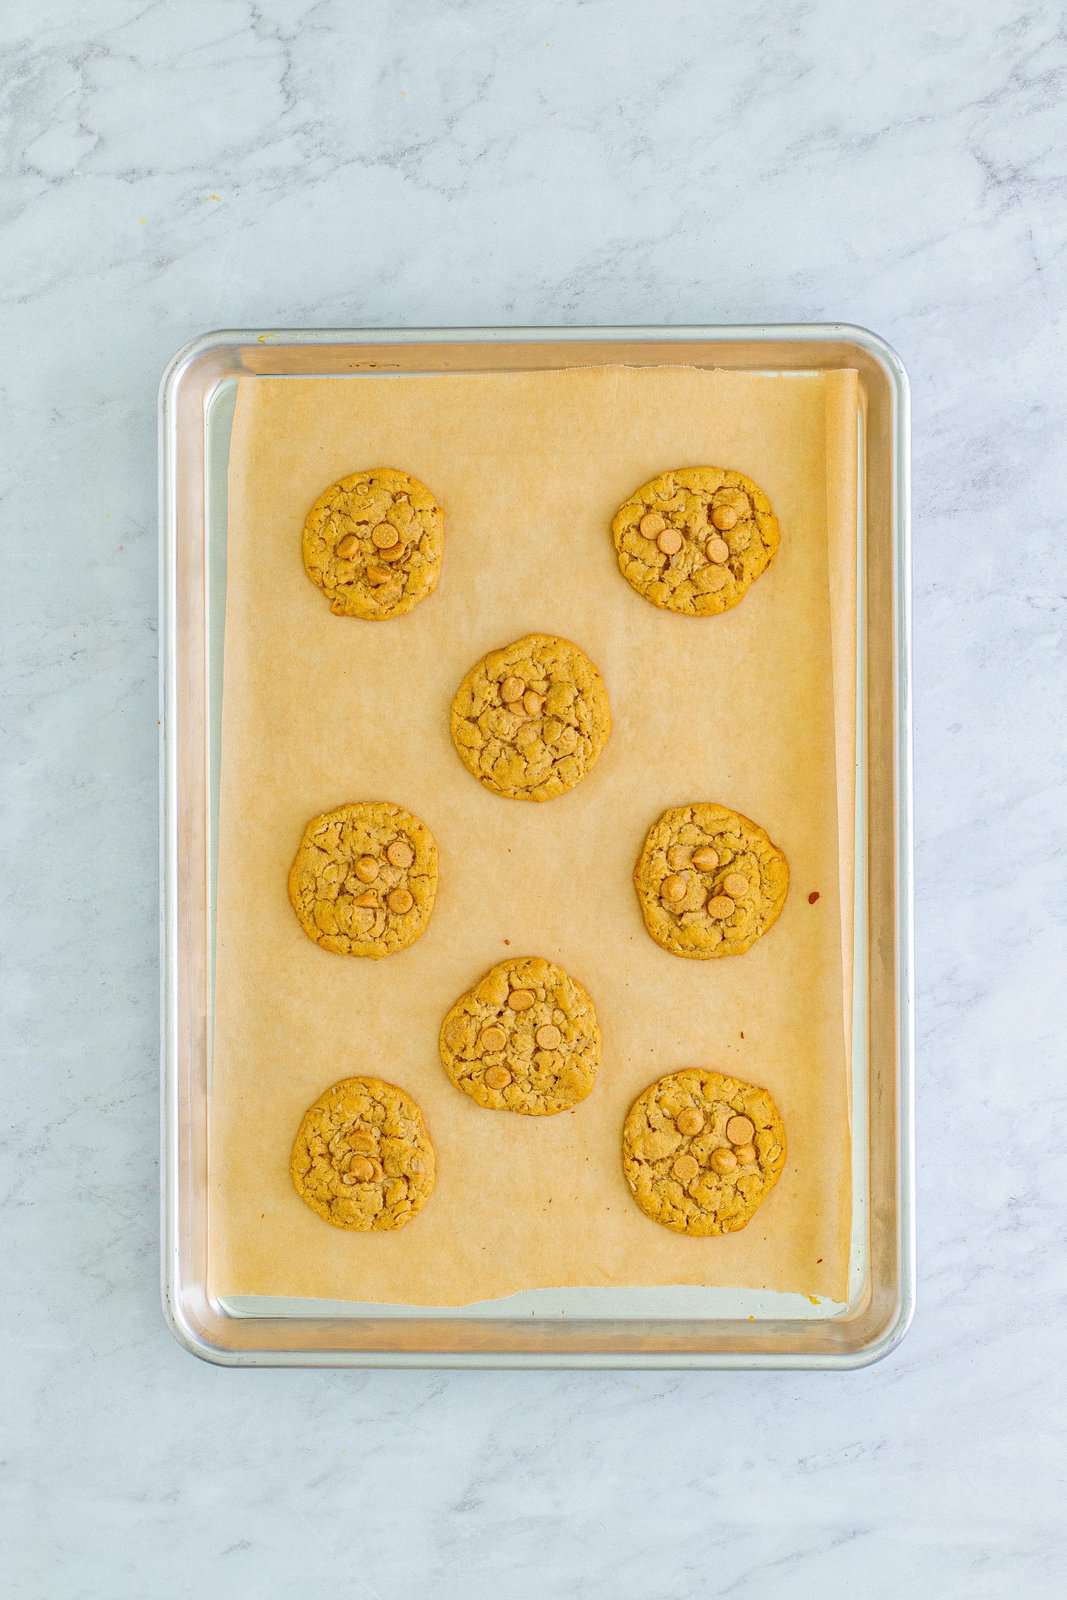 Baked cookies on parchment lined baking sheet.